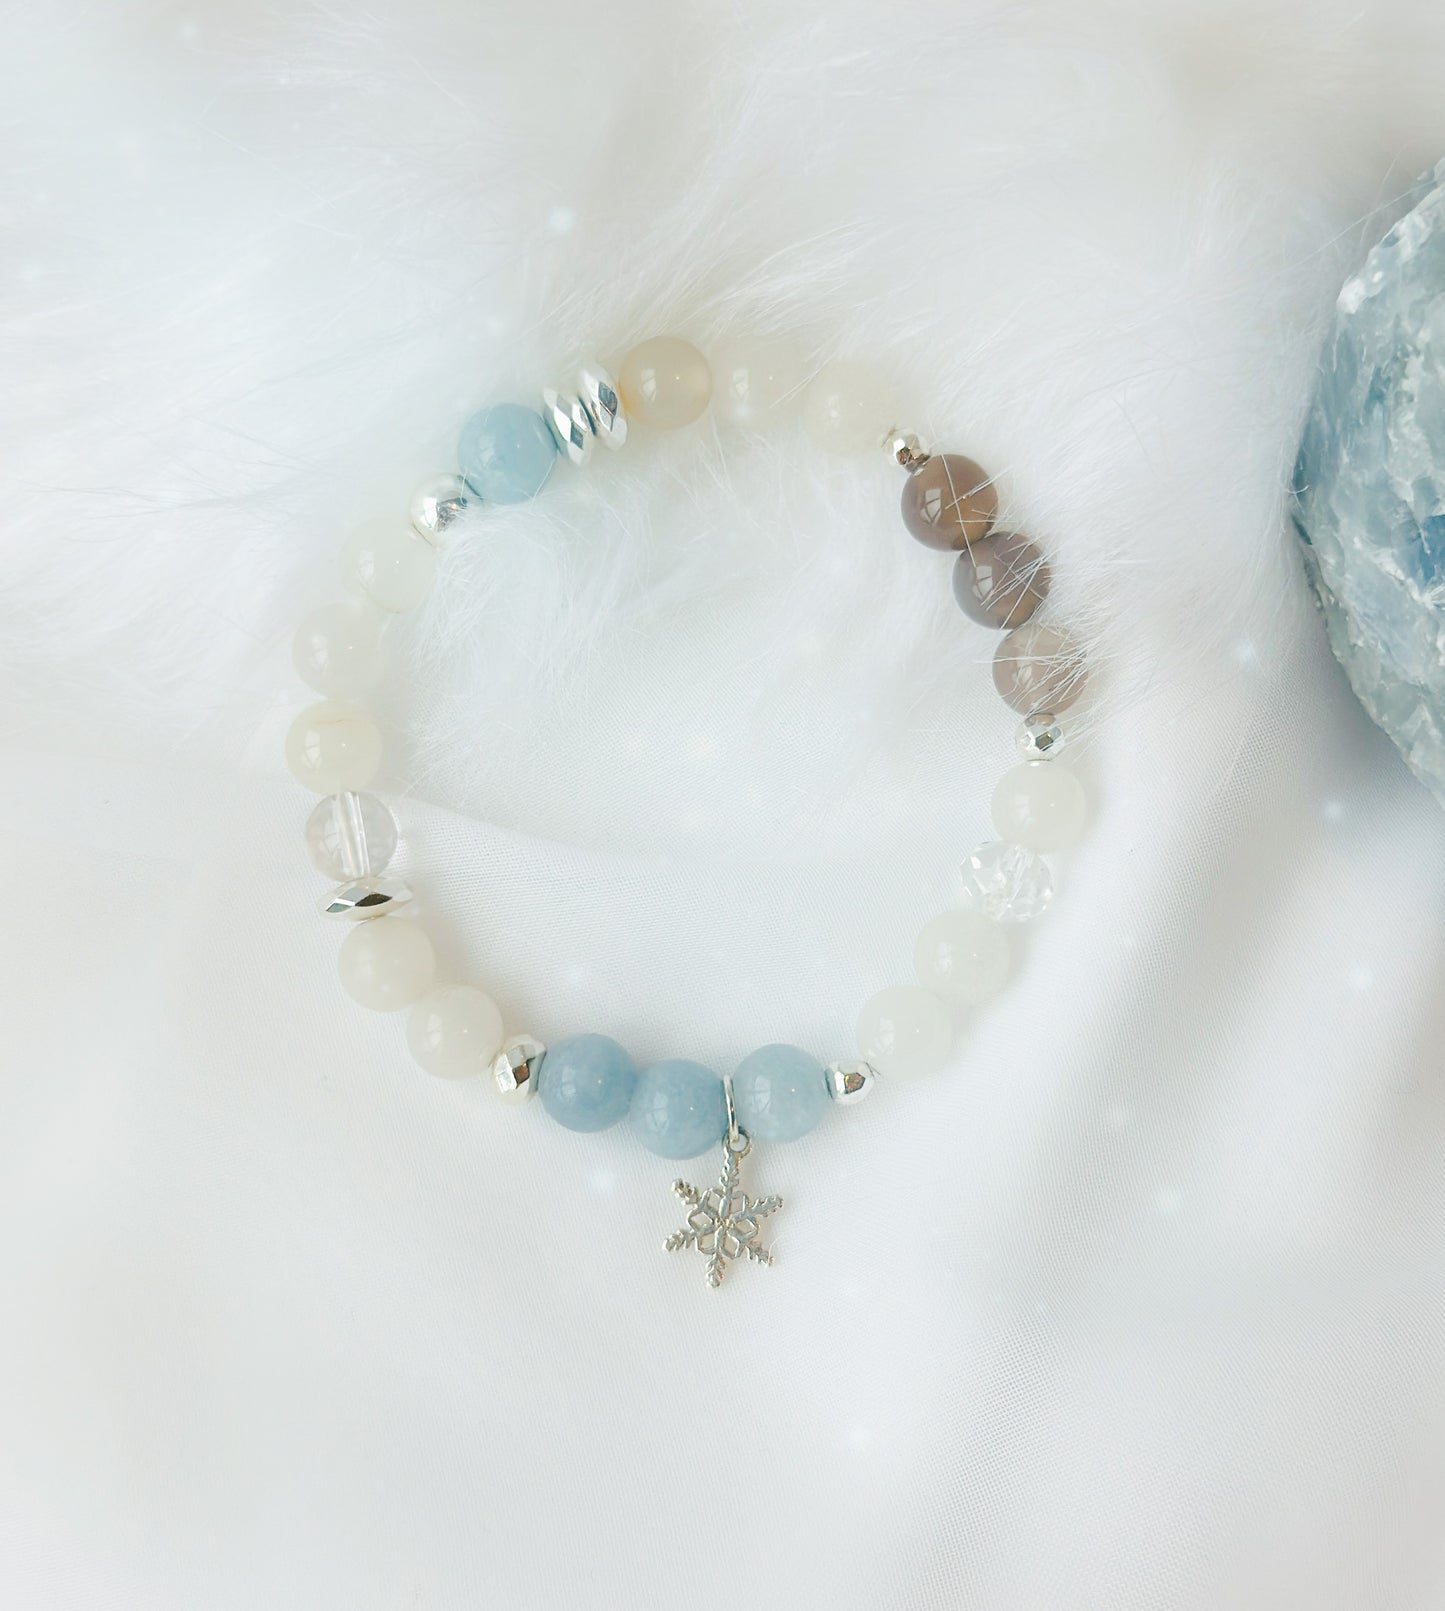 Snowflake Gemstone Bracelet Set, meticulously crafted with Aquamarine, White Jade, and a sterling silver snowflake charm. ❄️